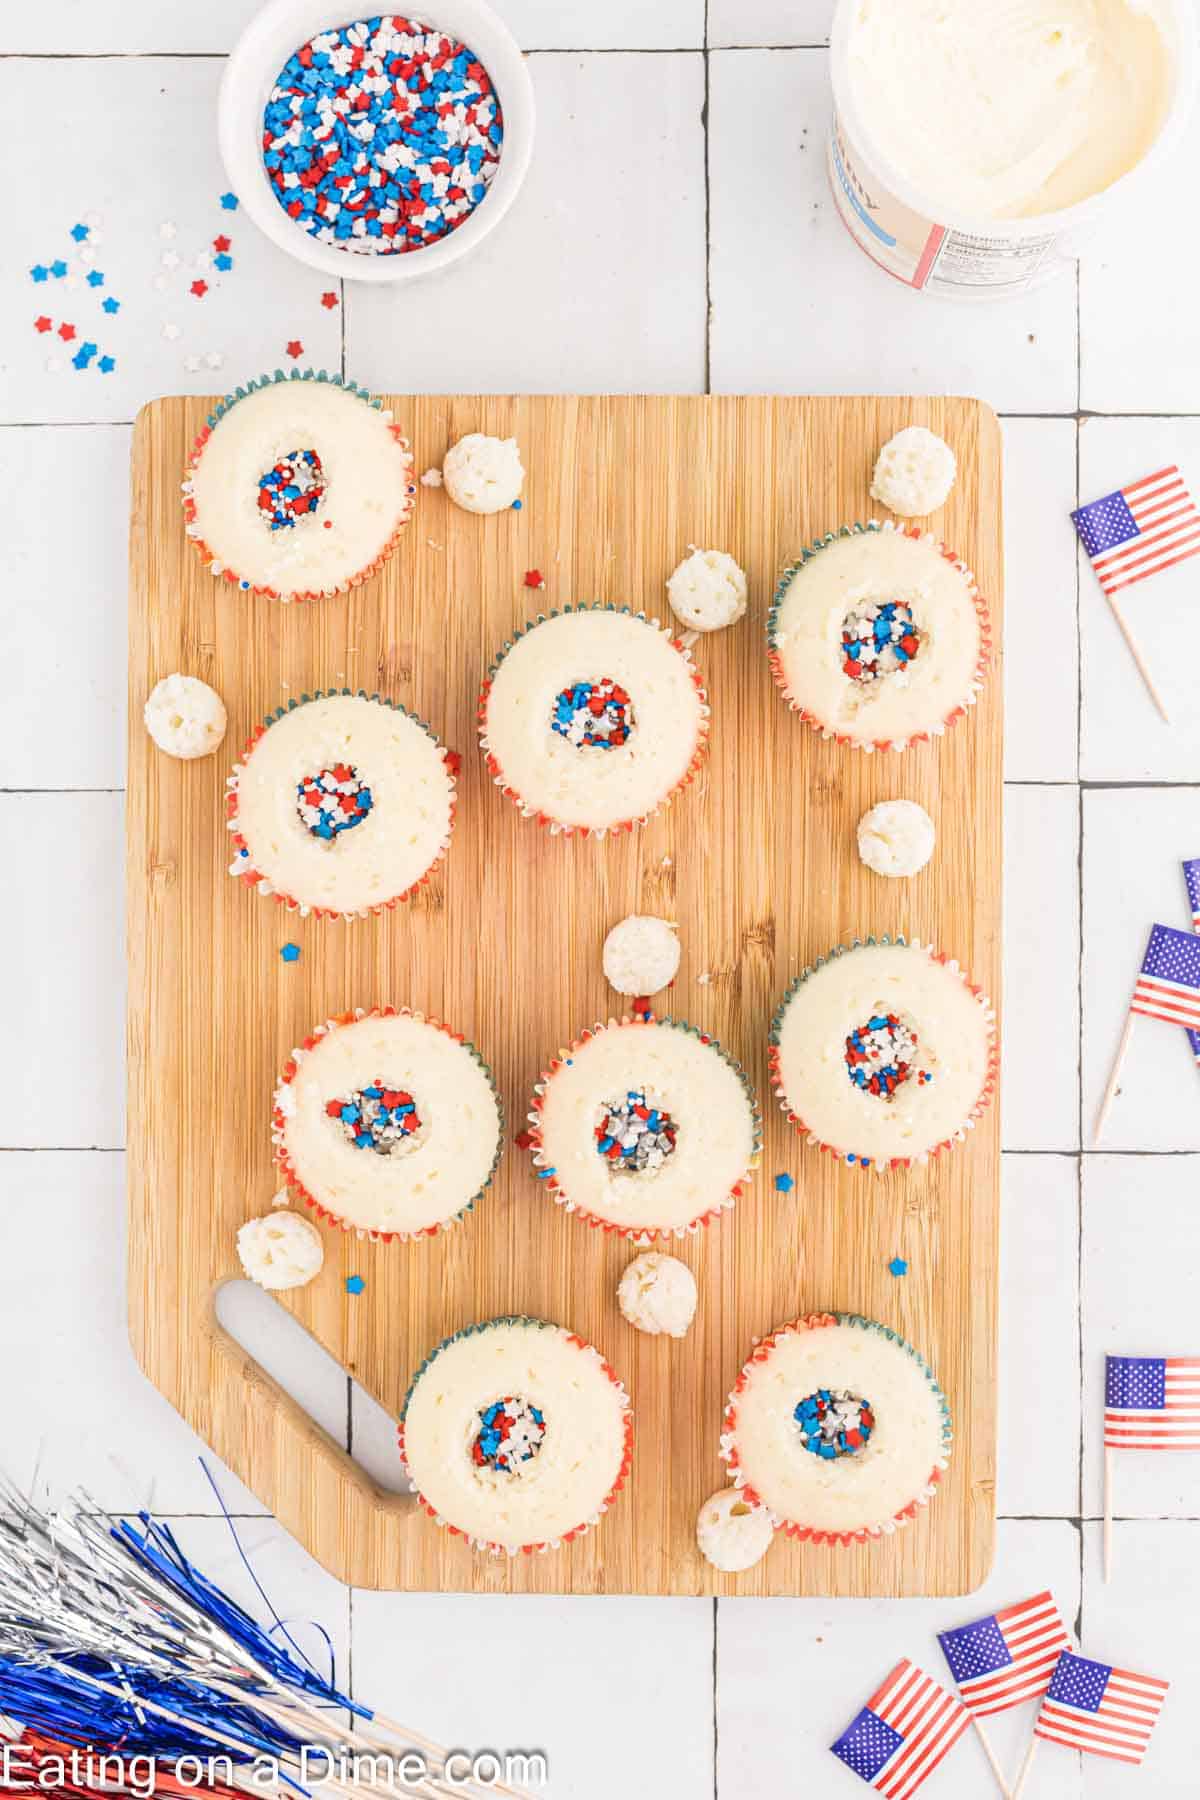 A wooden cutting board displays nine Firecracker Cupcakes frosted with white icing and topped with red, white, and blue star-shaped sprinkles. An icing spatula, a bowl of sprinkles, a tub of frosting, and small American flags adorn the white-tiled surface around the board.